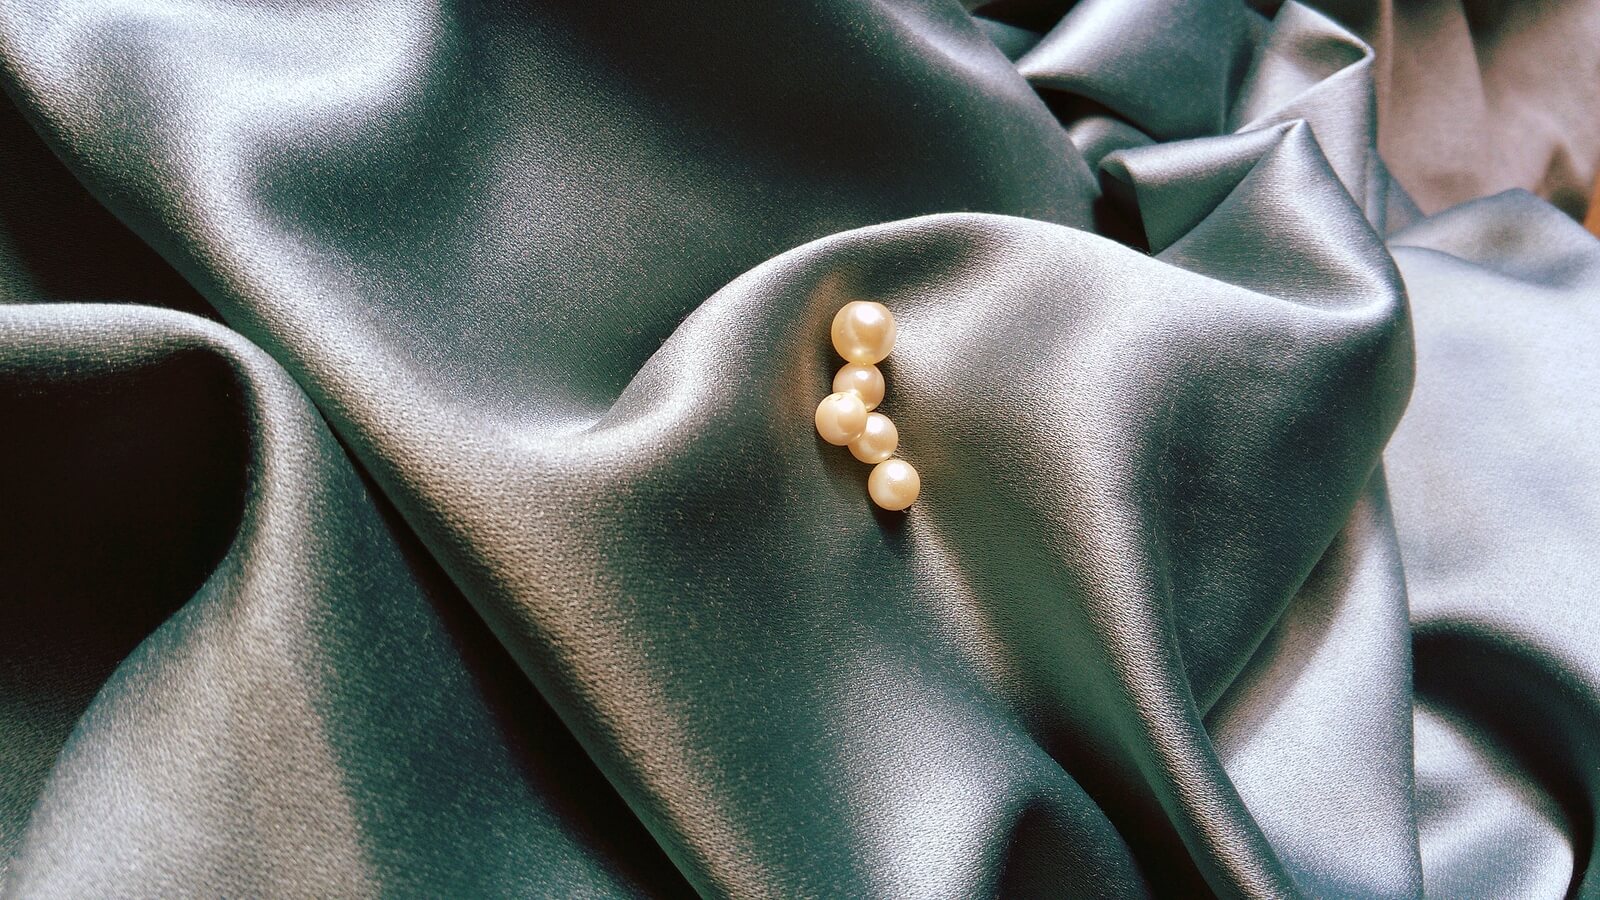 beautiful pearl beads on crumpled gray silk fabric with a greenish tint. Texture of satin or natural silk. Womens jewelry